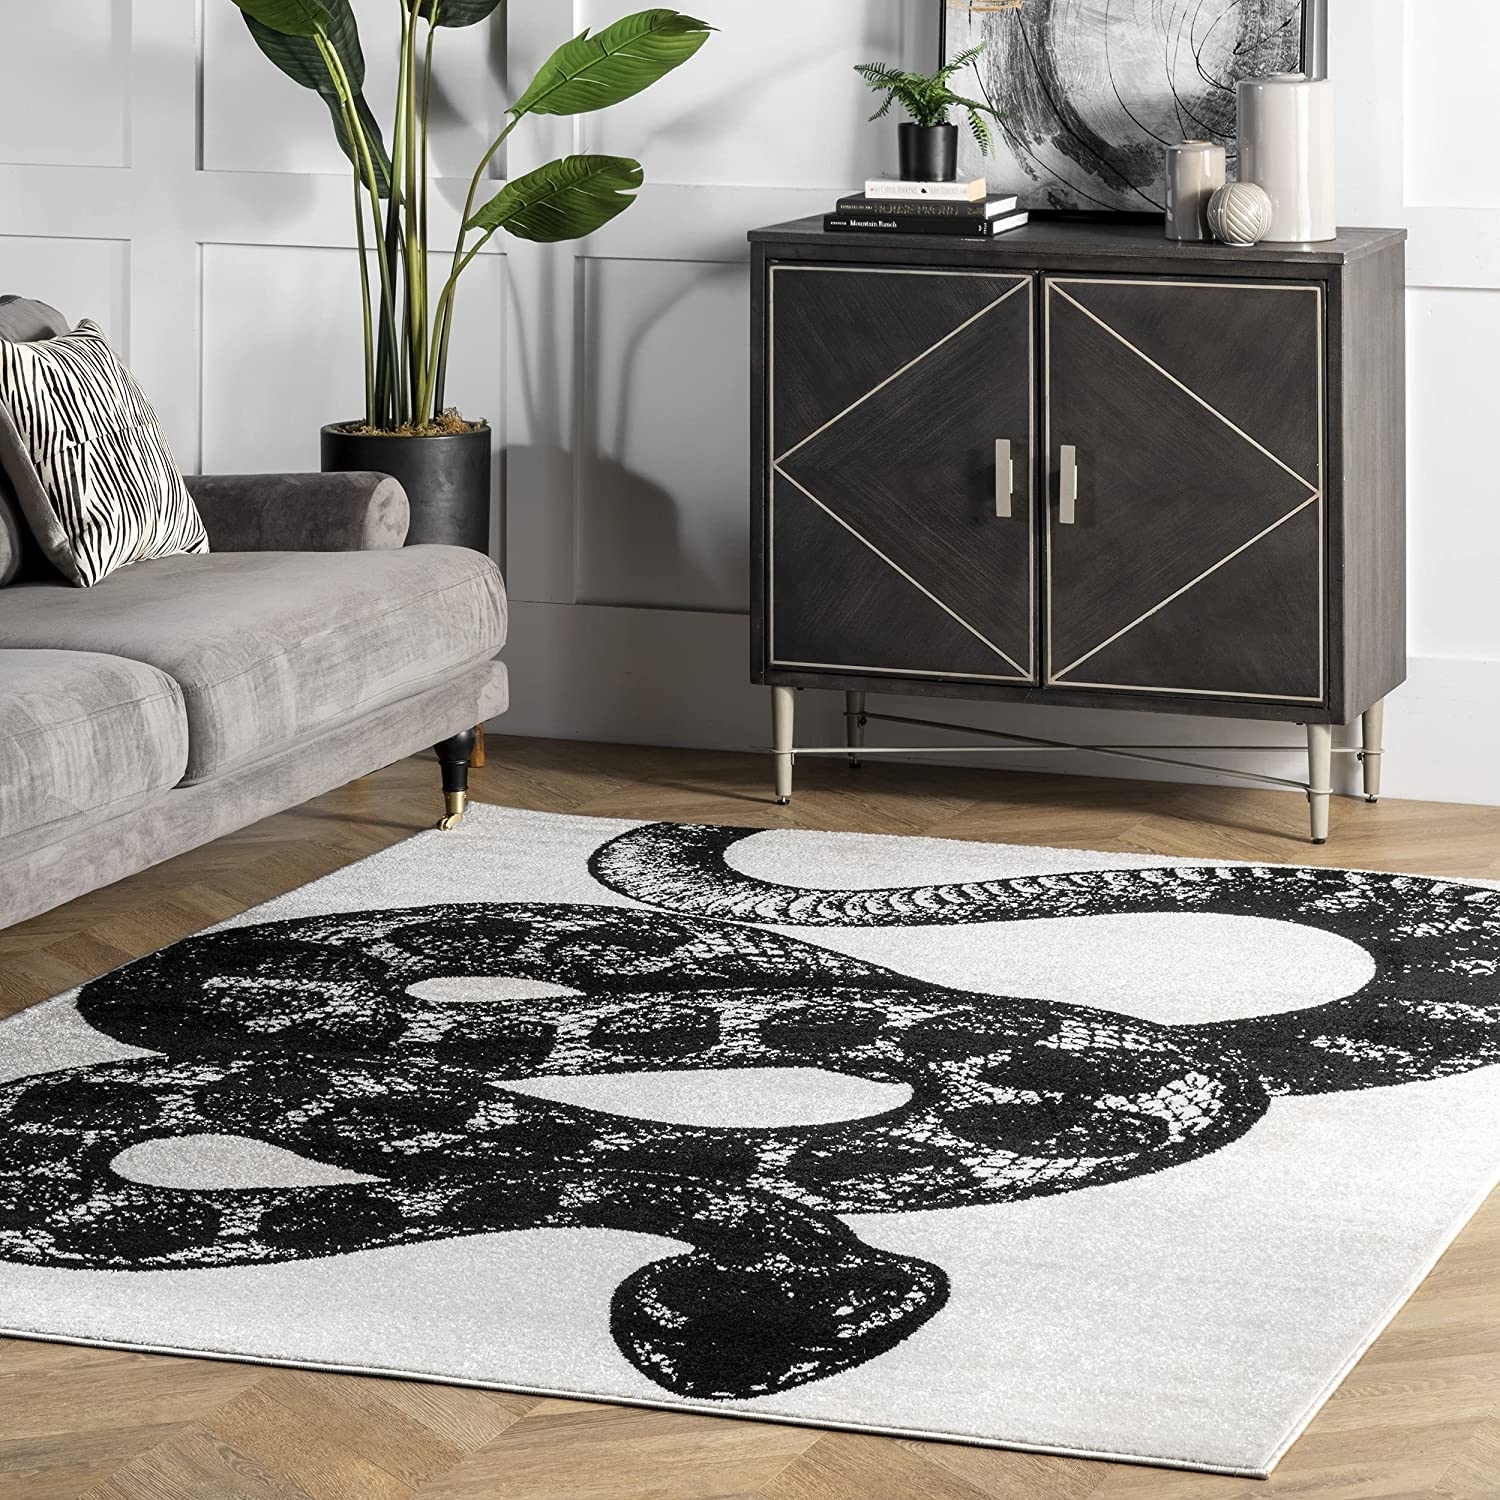 living room with serpent rug